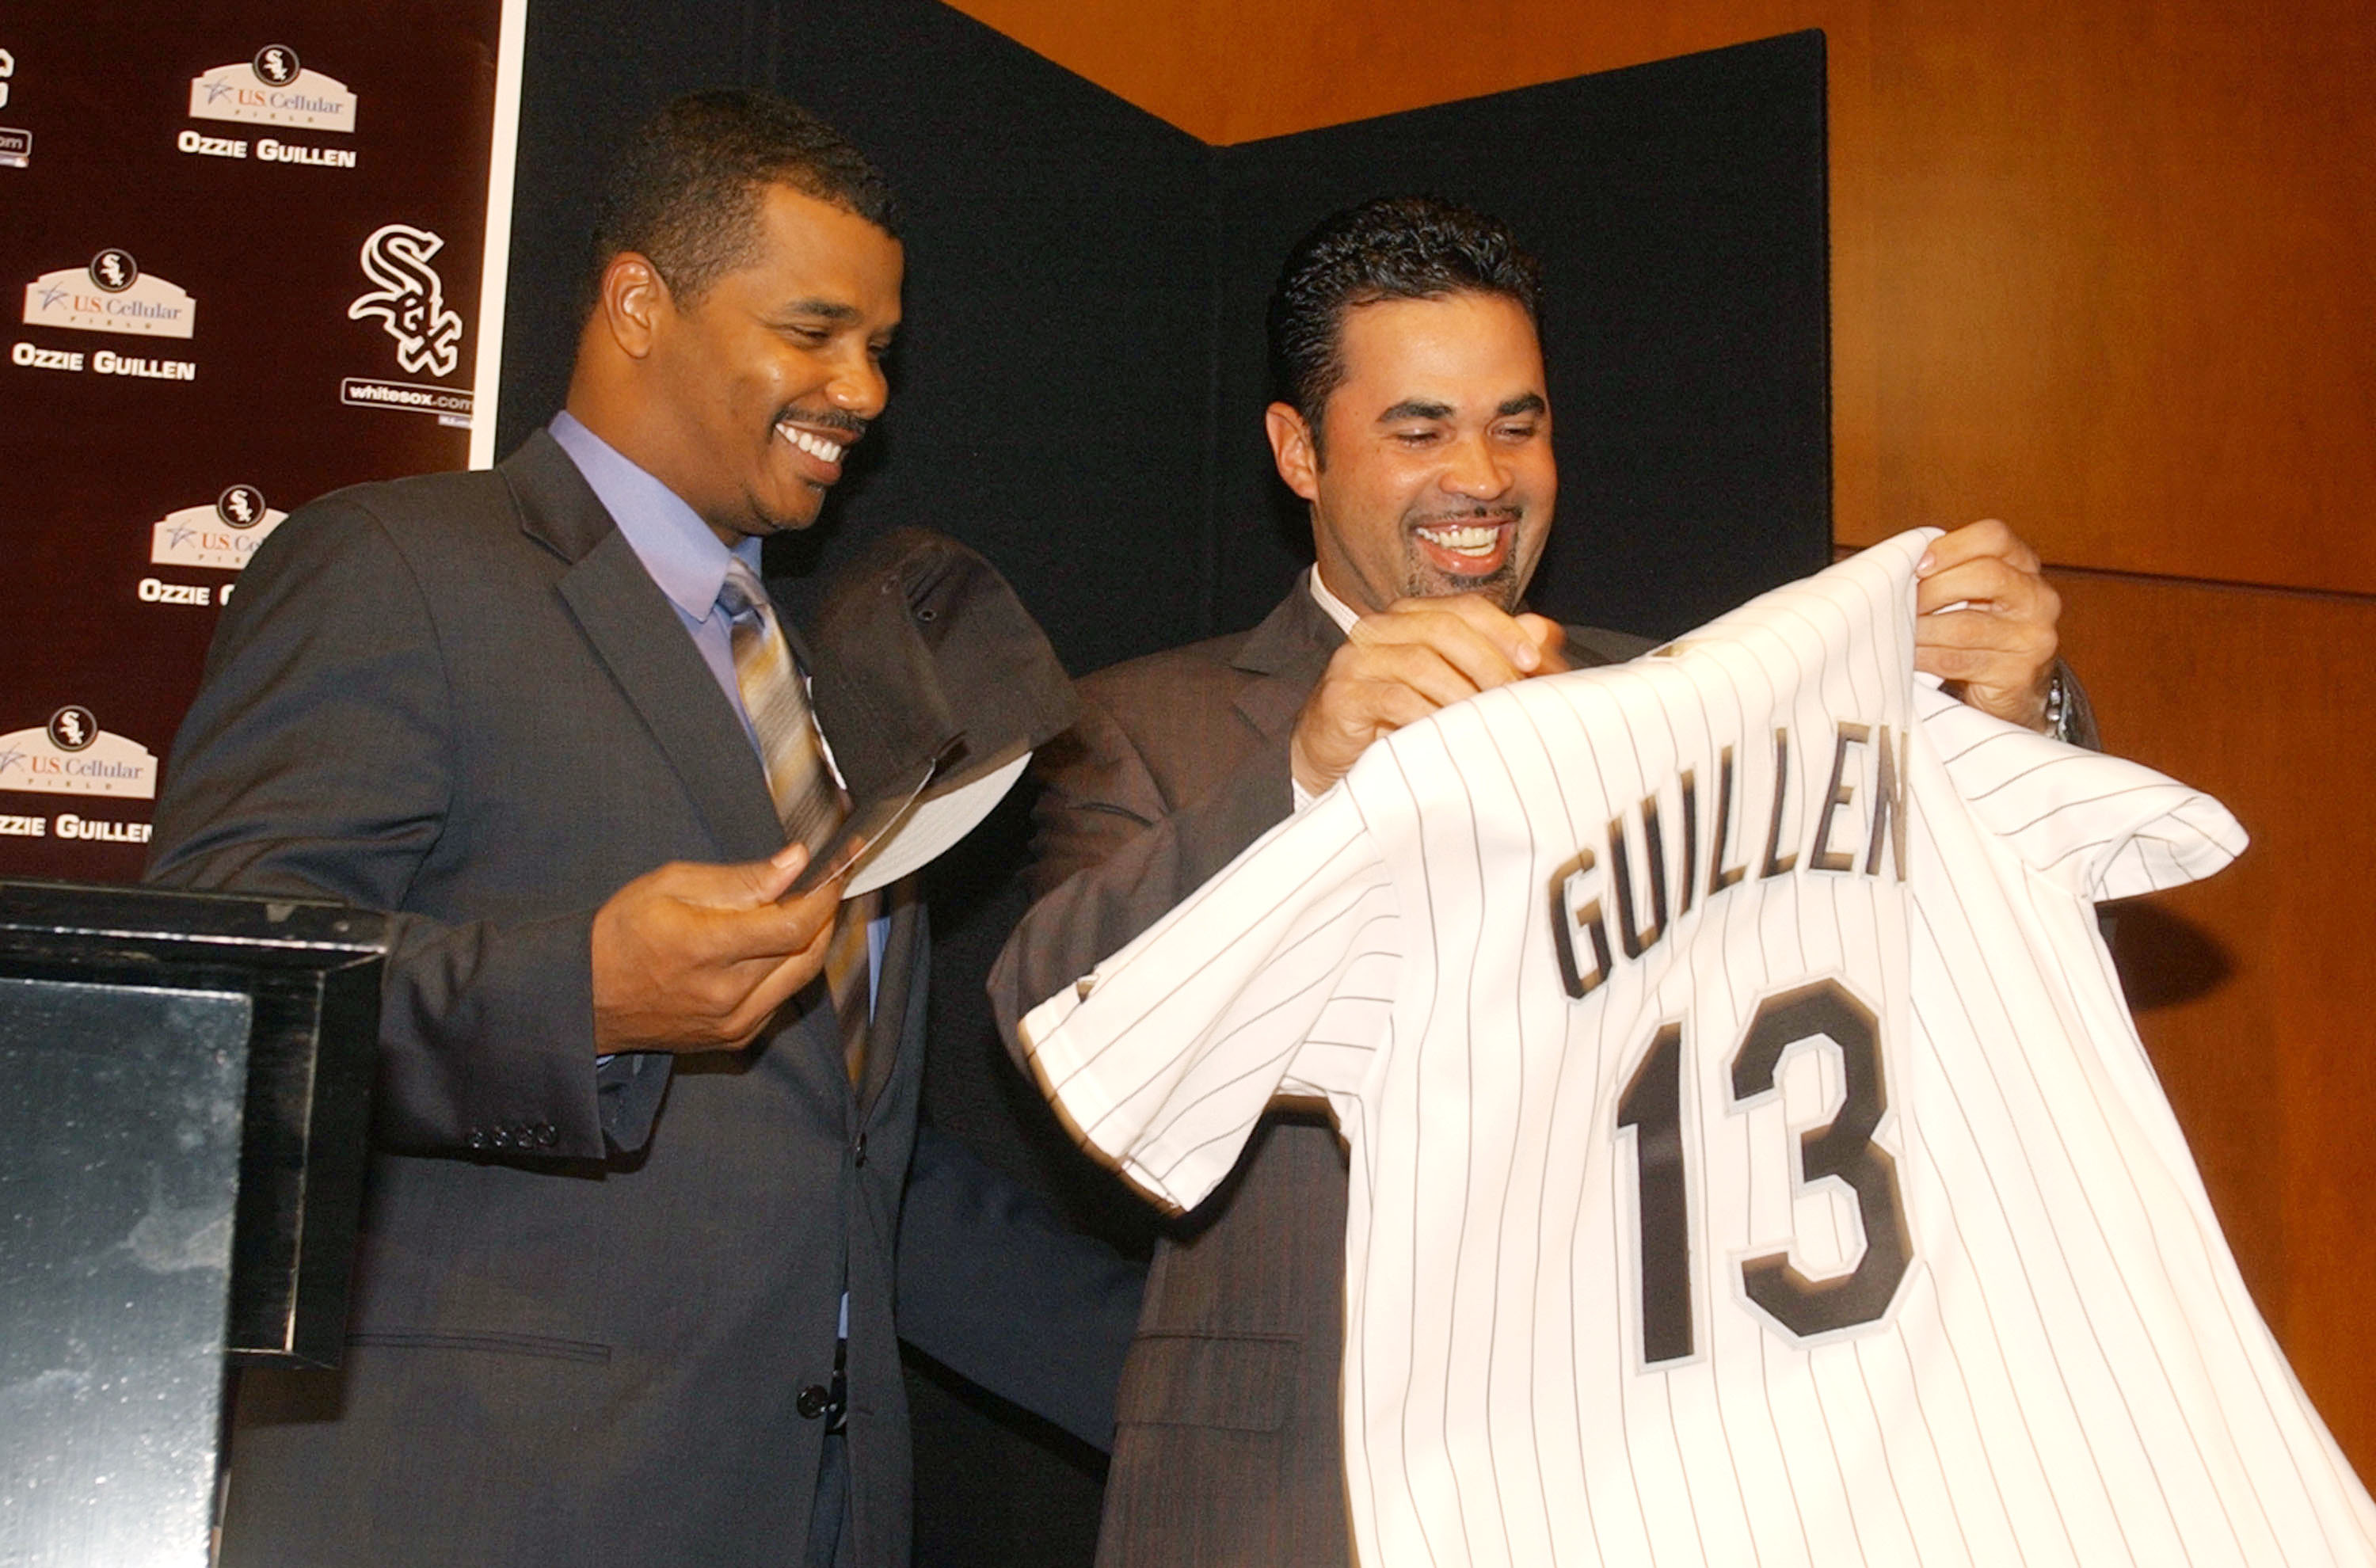 CHICAGO - NOVEMBER 3:  Chicago White Sox General Manager Ken Williams (L) presents new Manager Ozzie Guillen, a former shortstop for the club, with a jersey at a news conference November 3, 2003 at U.S. Cellular Field in Chicago, Illinois.  (Photo by Jona